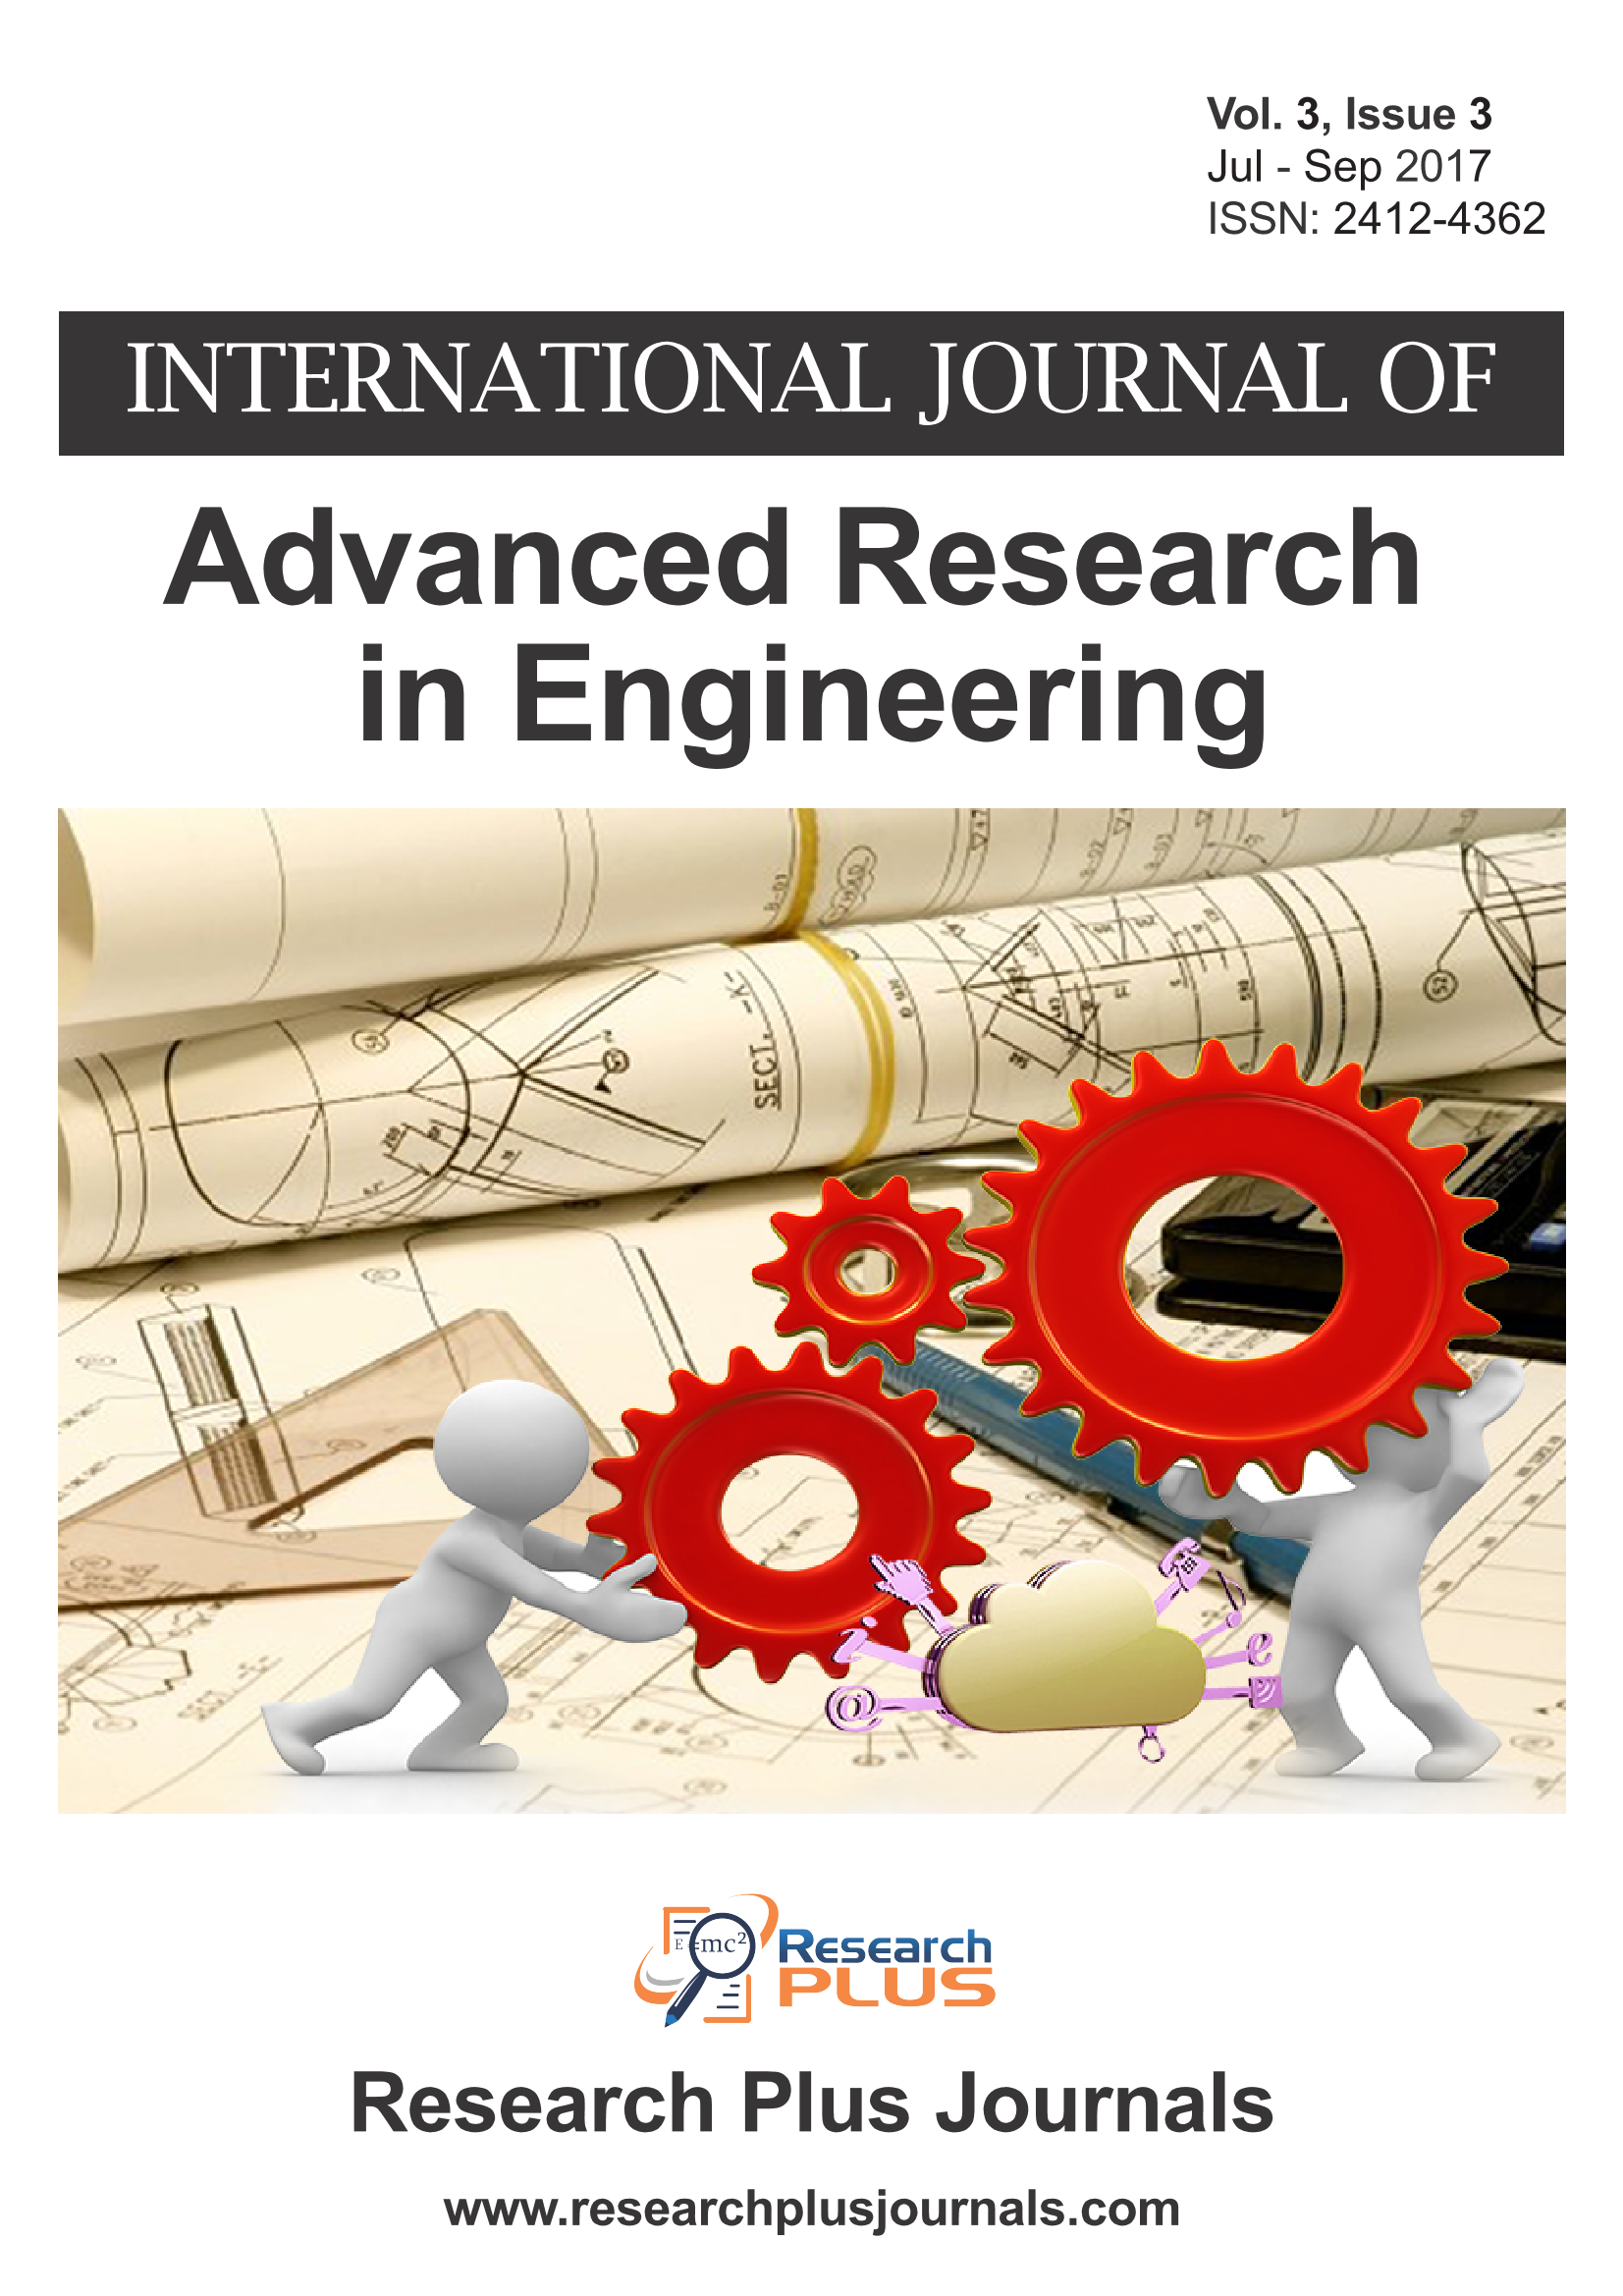 Volume 3, Issue 3, International Journal of Advanced Research in Engineering (IJARE)  (Online ISSN 2412-4362)